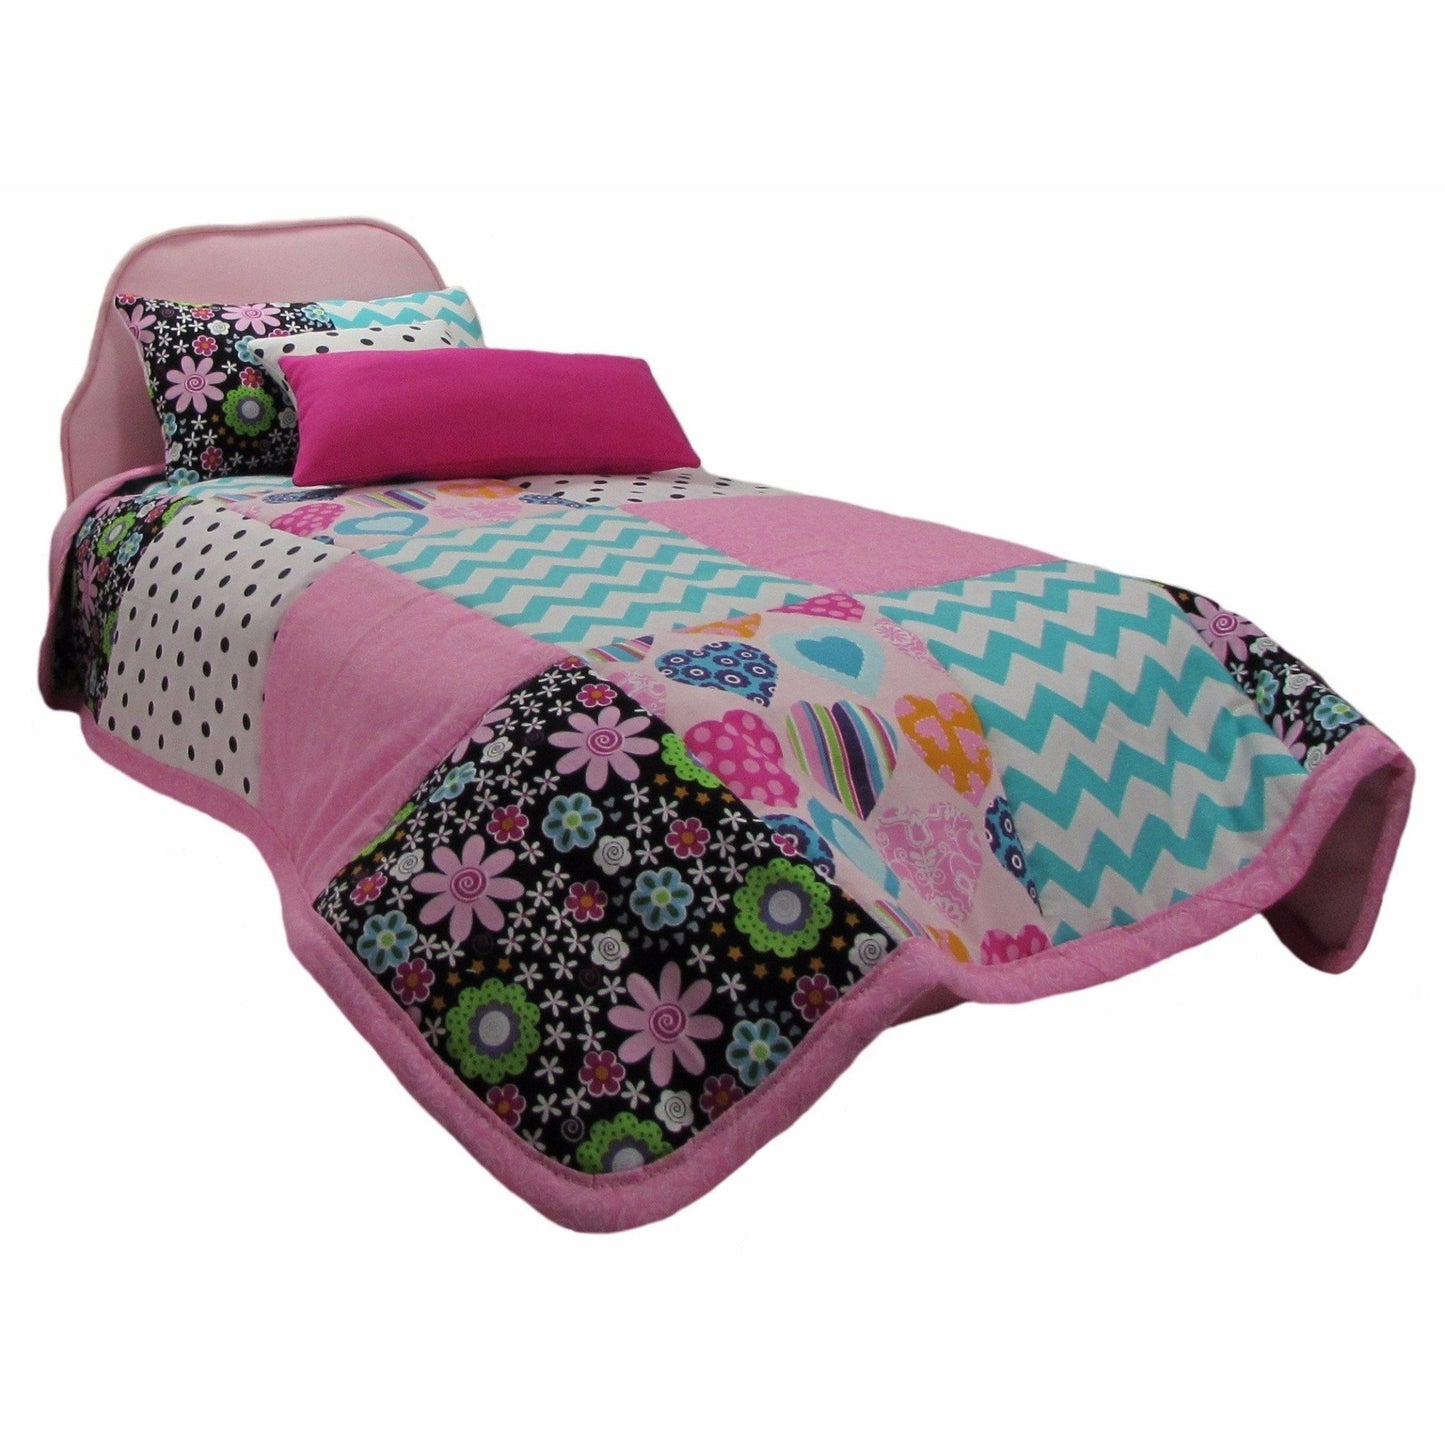 Floral, Dots, and Chevron Doll Quilt and Upholstered Pink Doll Bed for 18-inch dolls